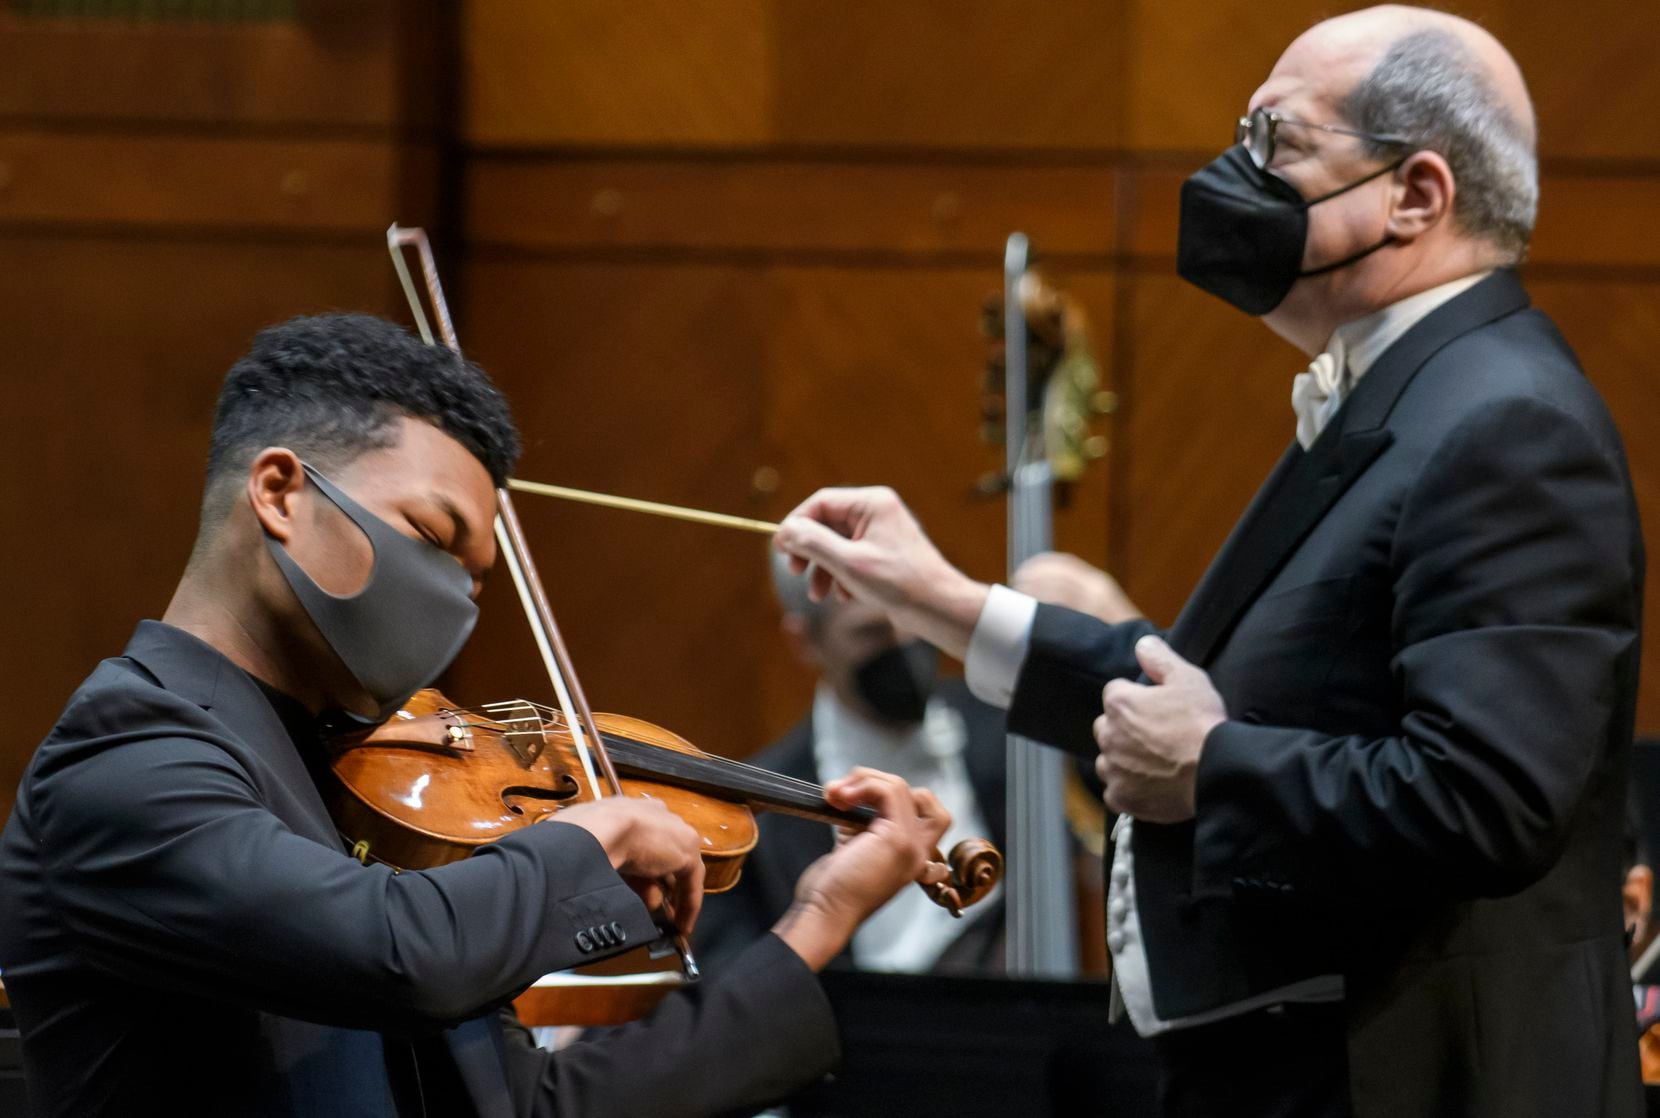 Violinist Randall Goosby performs Mozart's Violin Concerto No. 5 in A Major with Robert Spano conducting the Fort Worth Symphony on Jan. 14, 2022, at Bass Performance Hall in Fort Worth, Texas. 